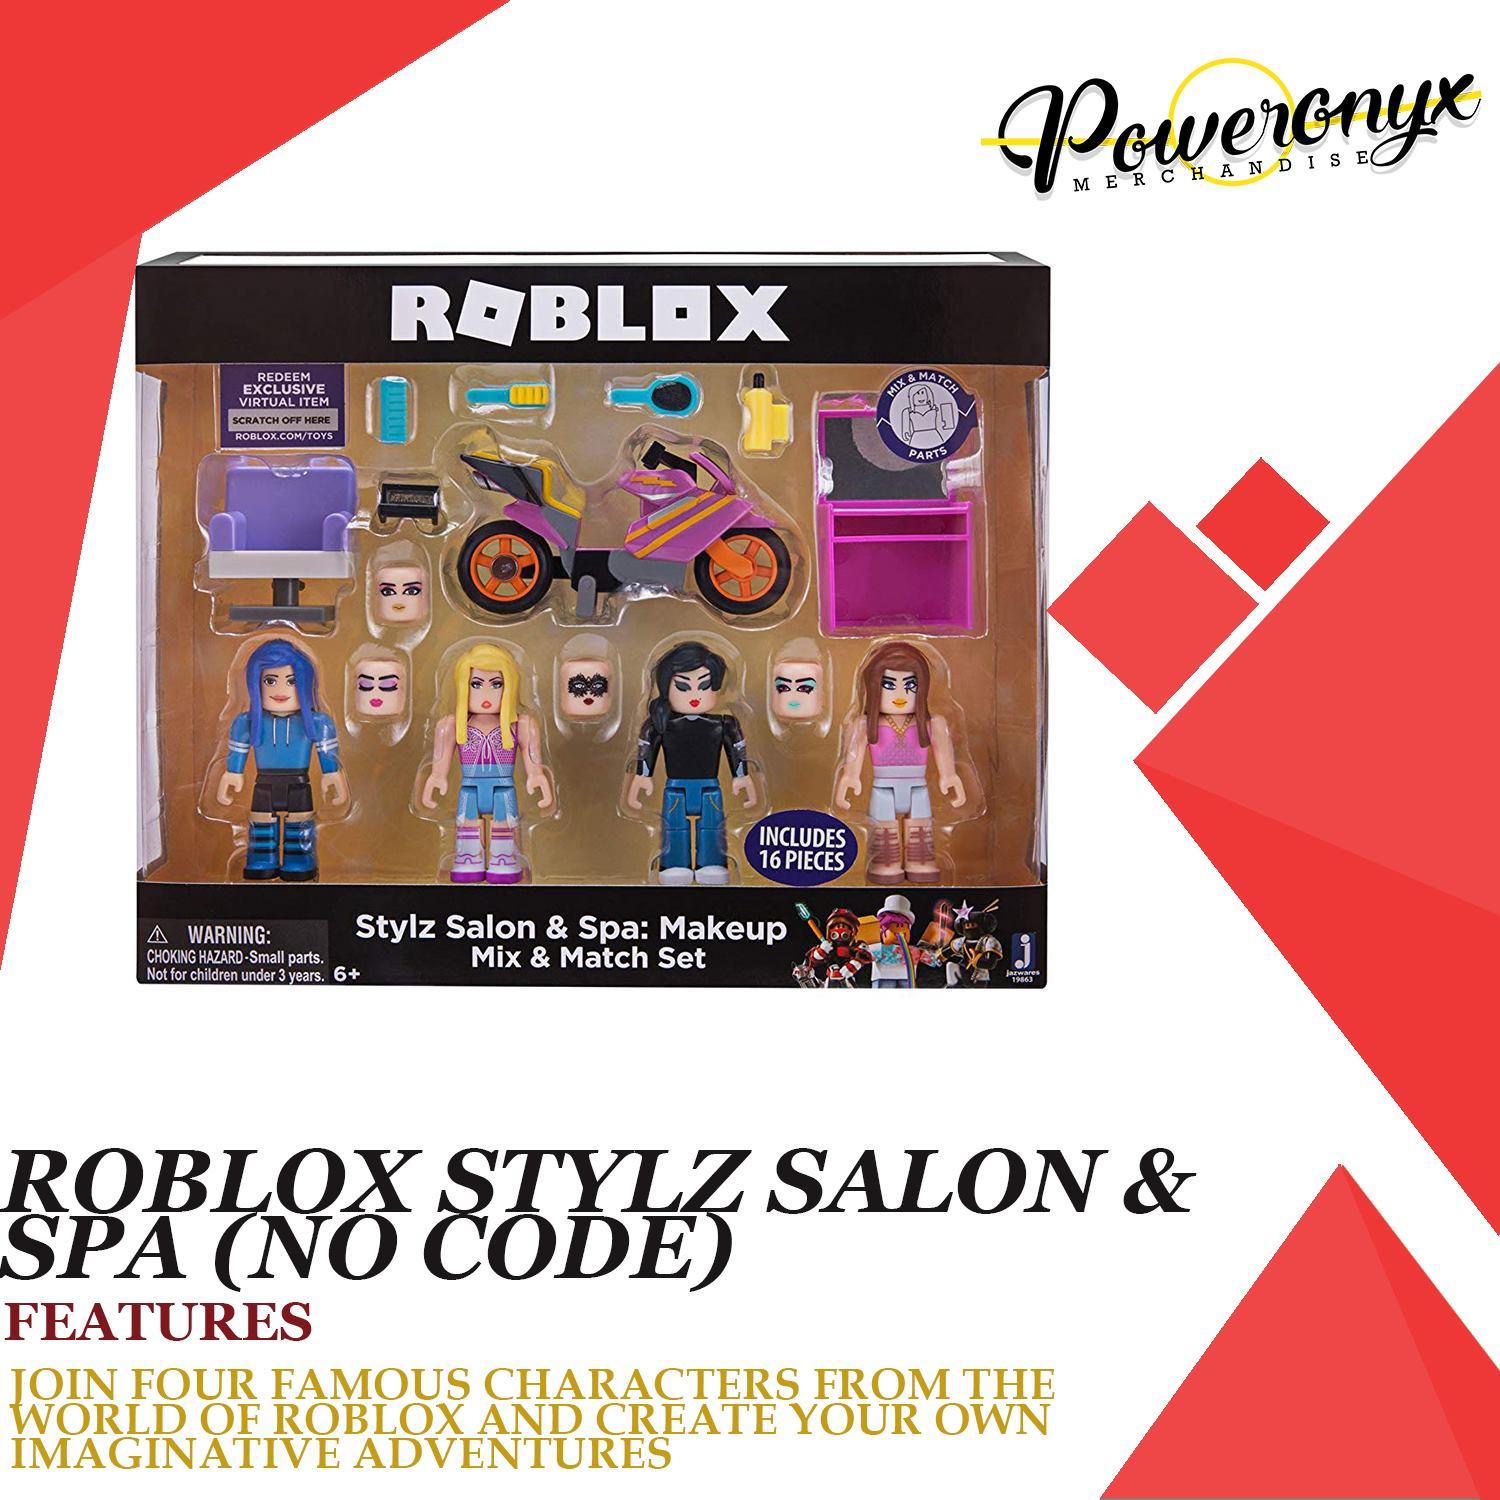 Roblox Stylz Salon Spa No Code Toys Games Toys On Carousell - roblox.com toys code